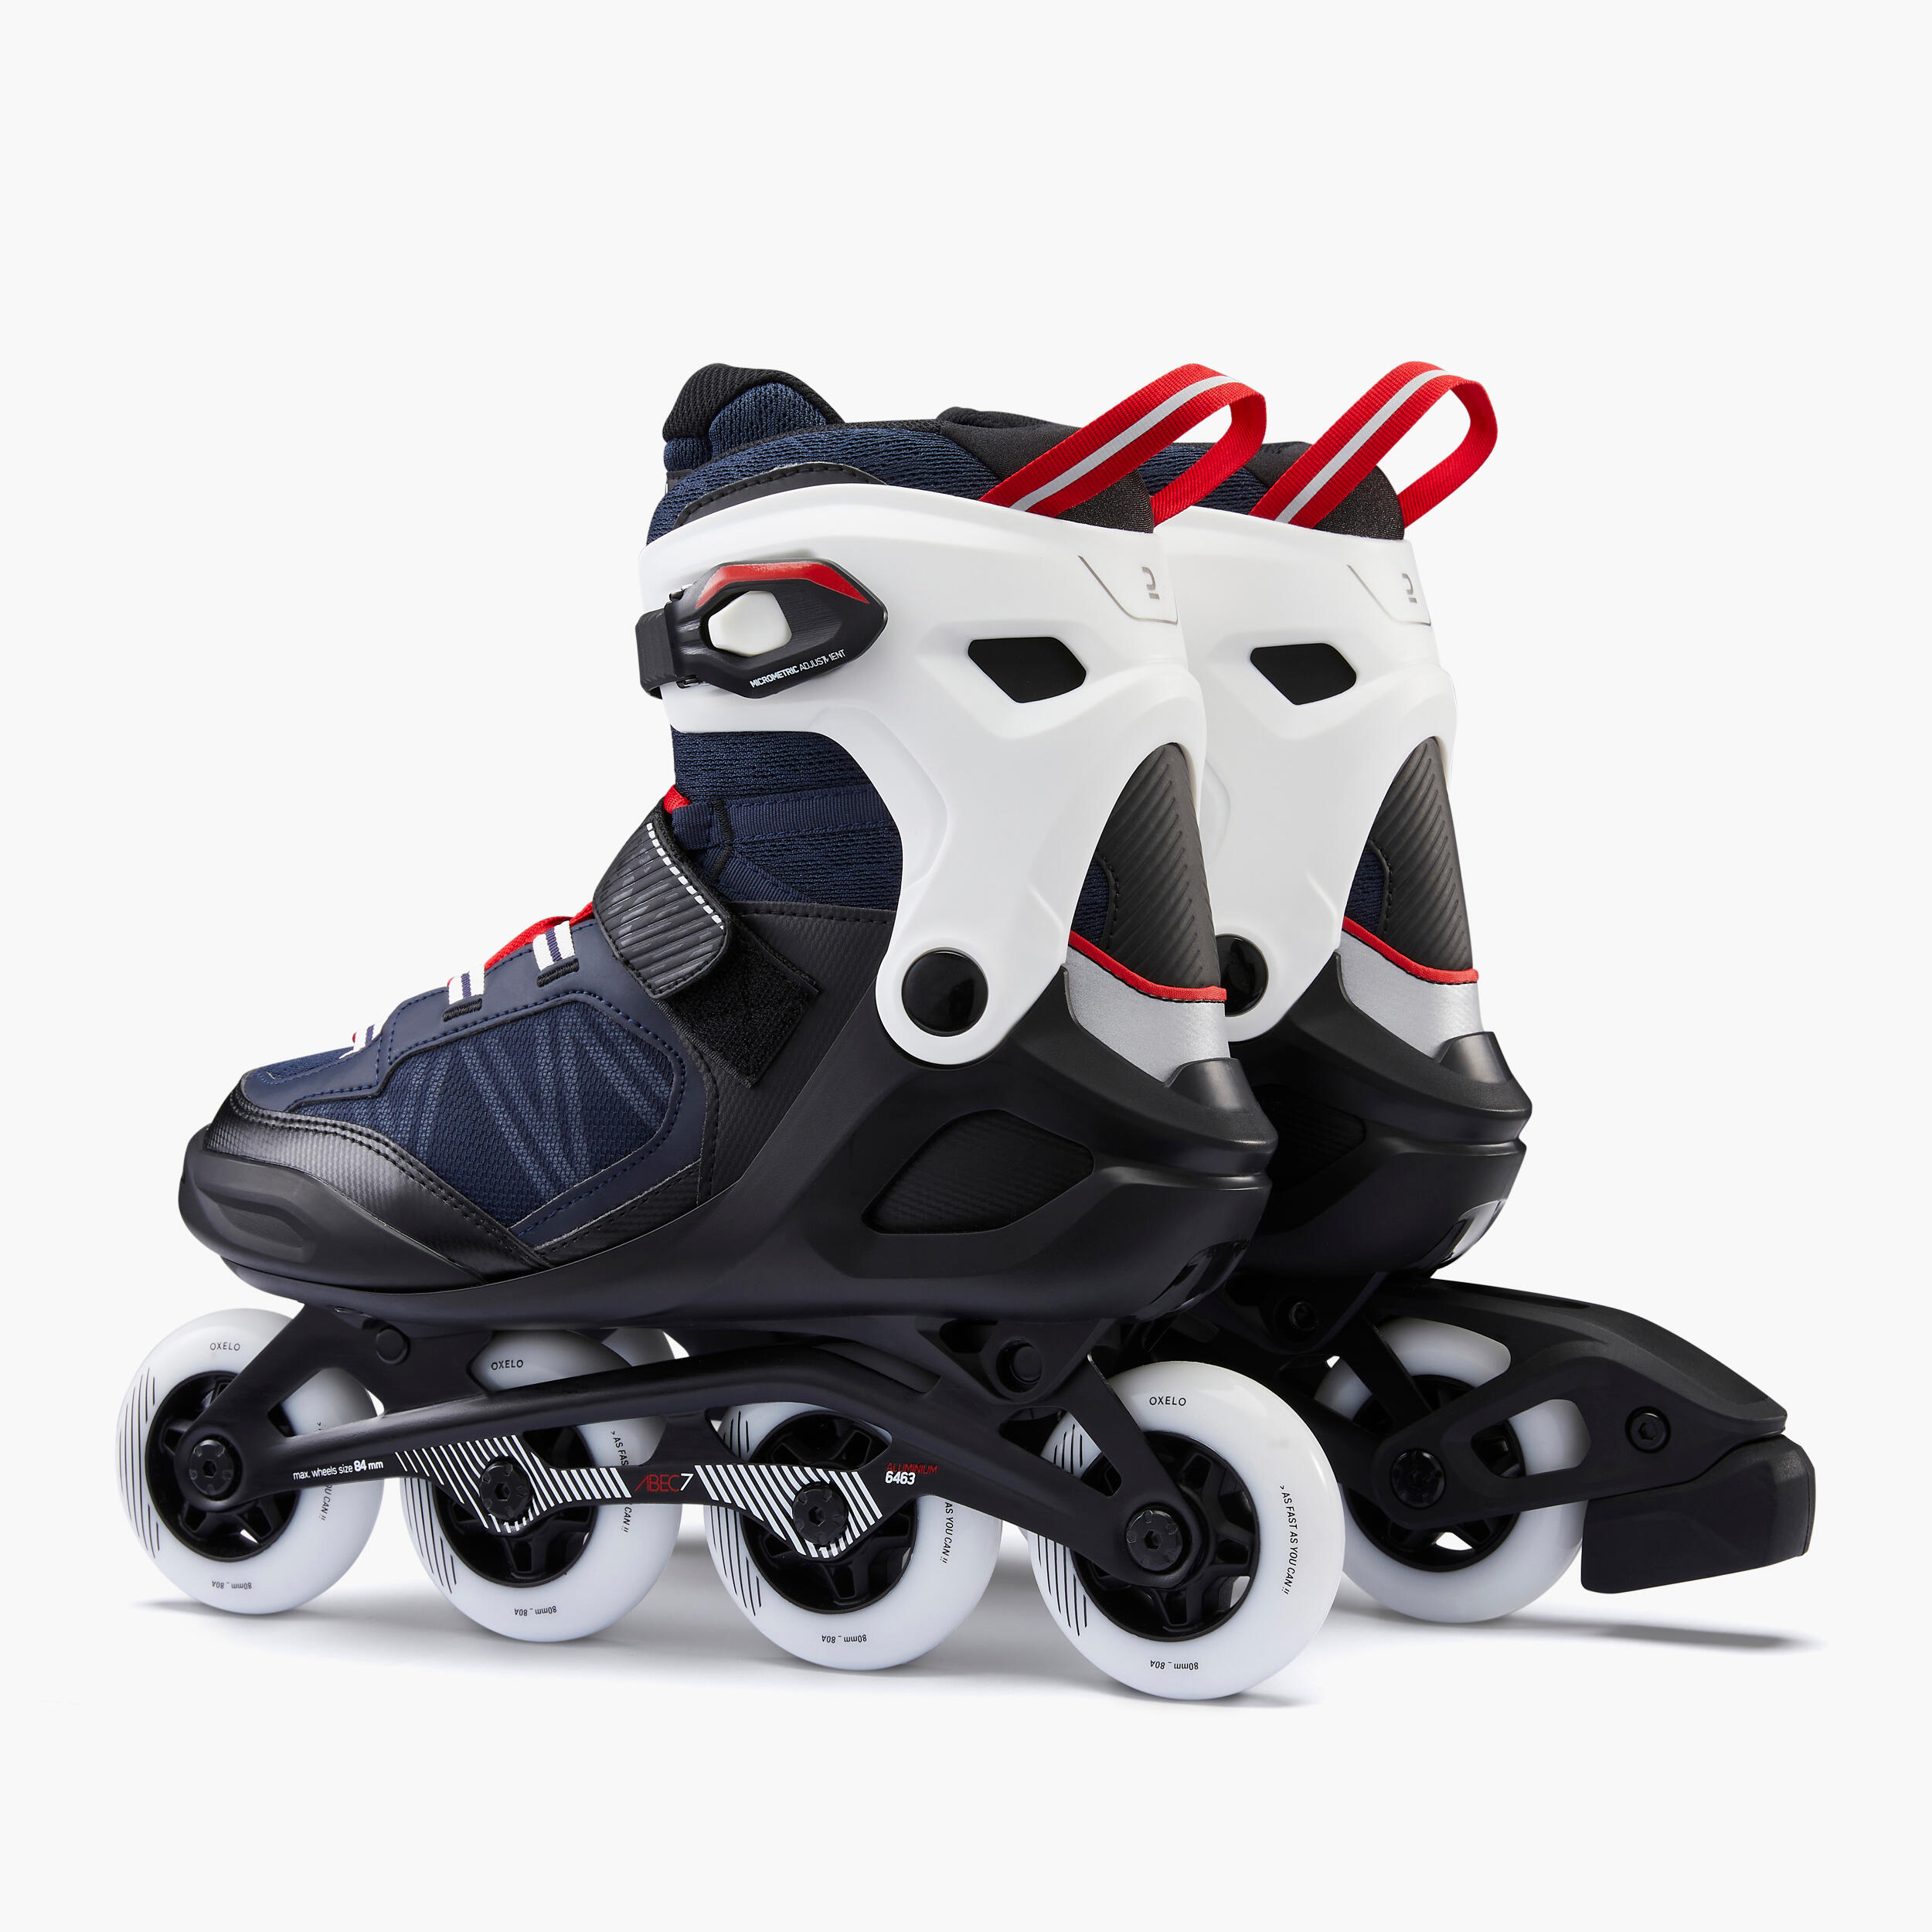 In-line Skates - FIT 500 Blue/Red - OXELO